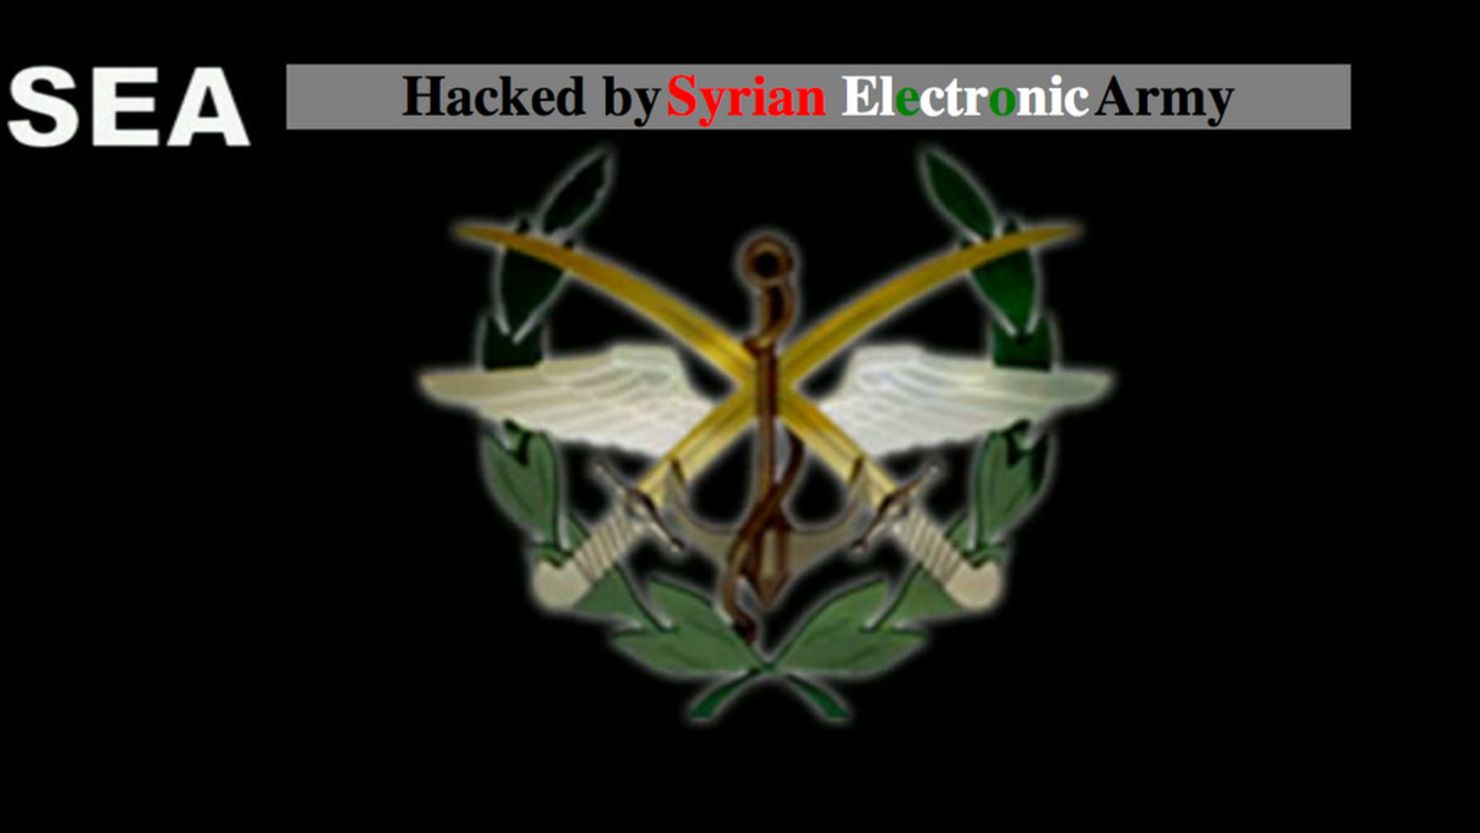 Users who tried to access NYTimes.com Tuesday encountered error messages or web pages from the Syrian Electronic Army. 